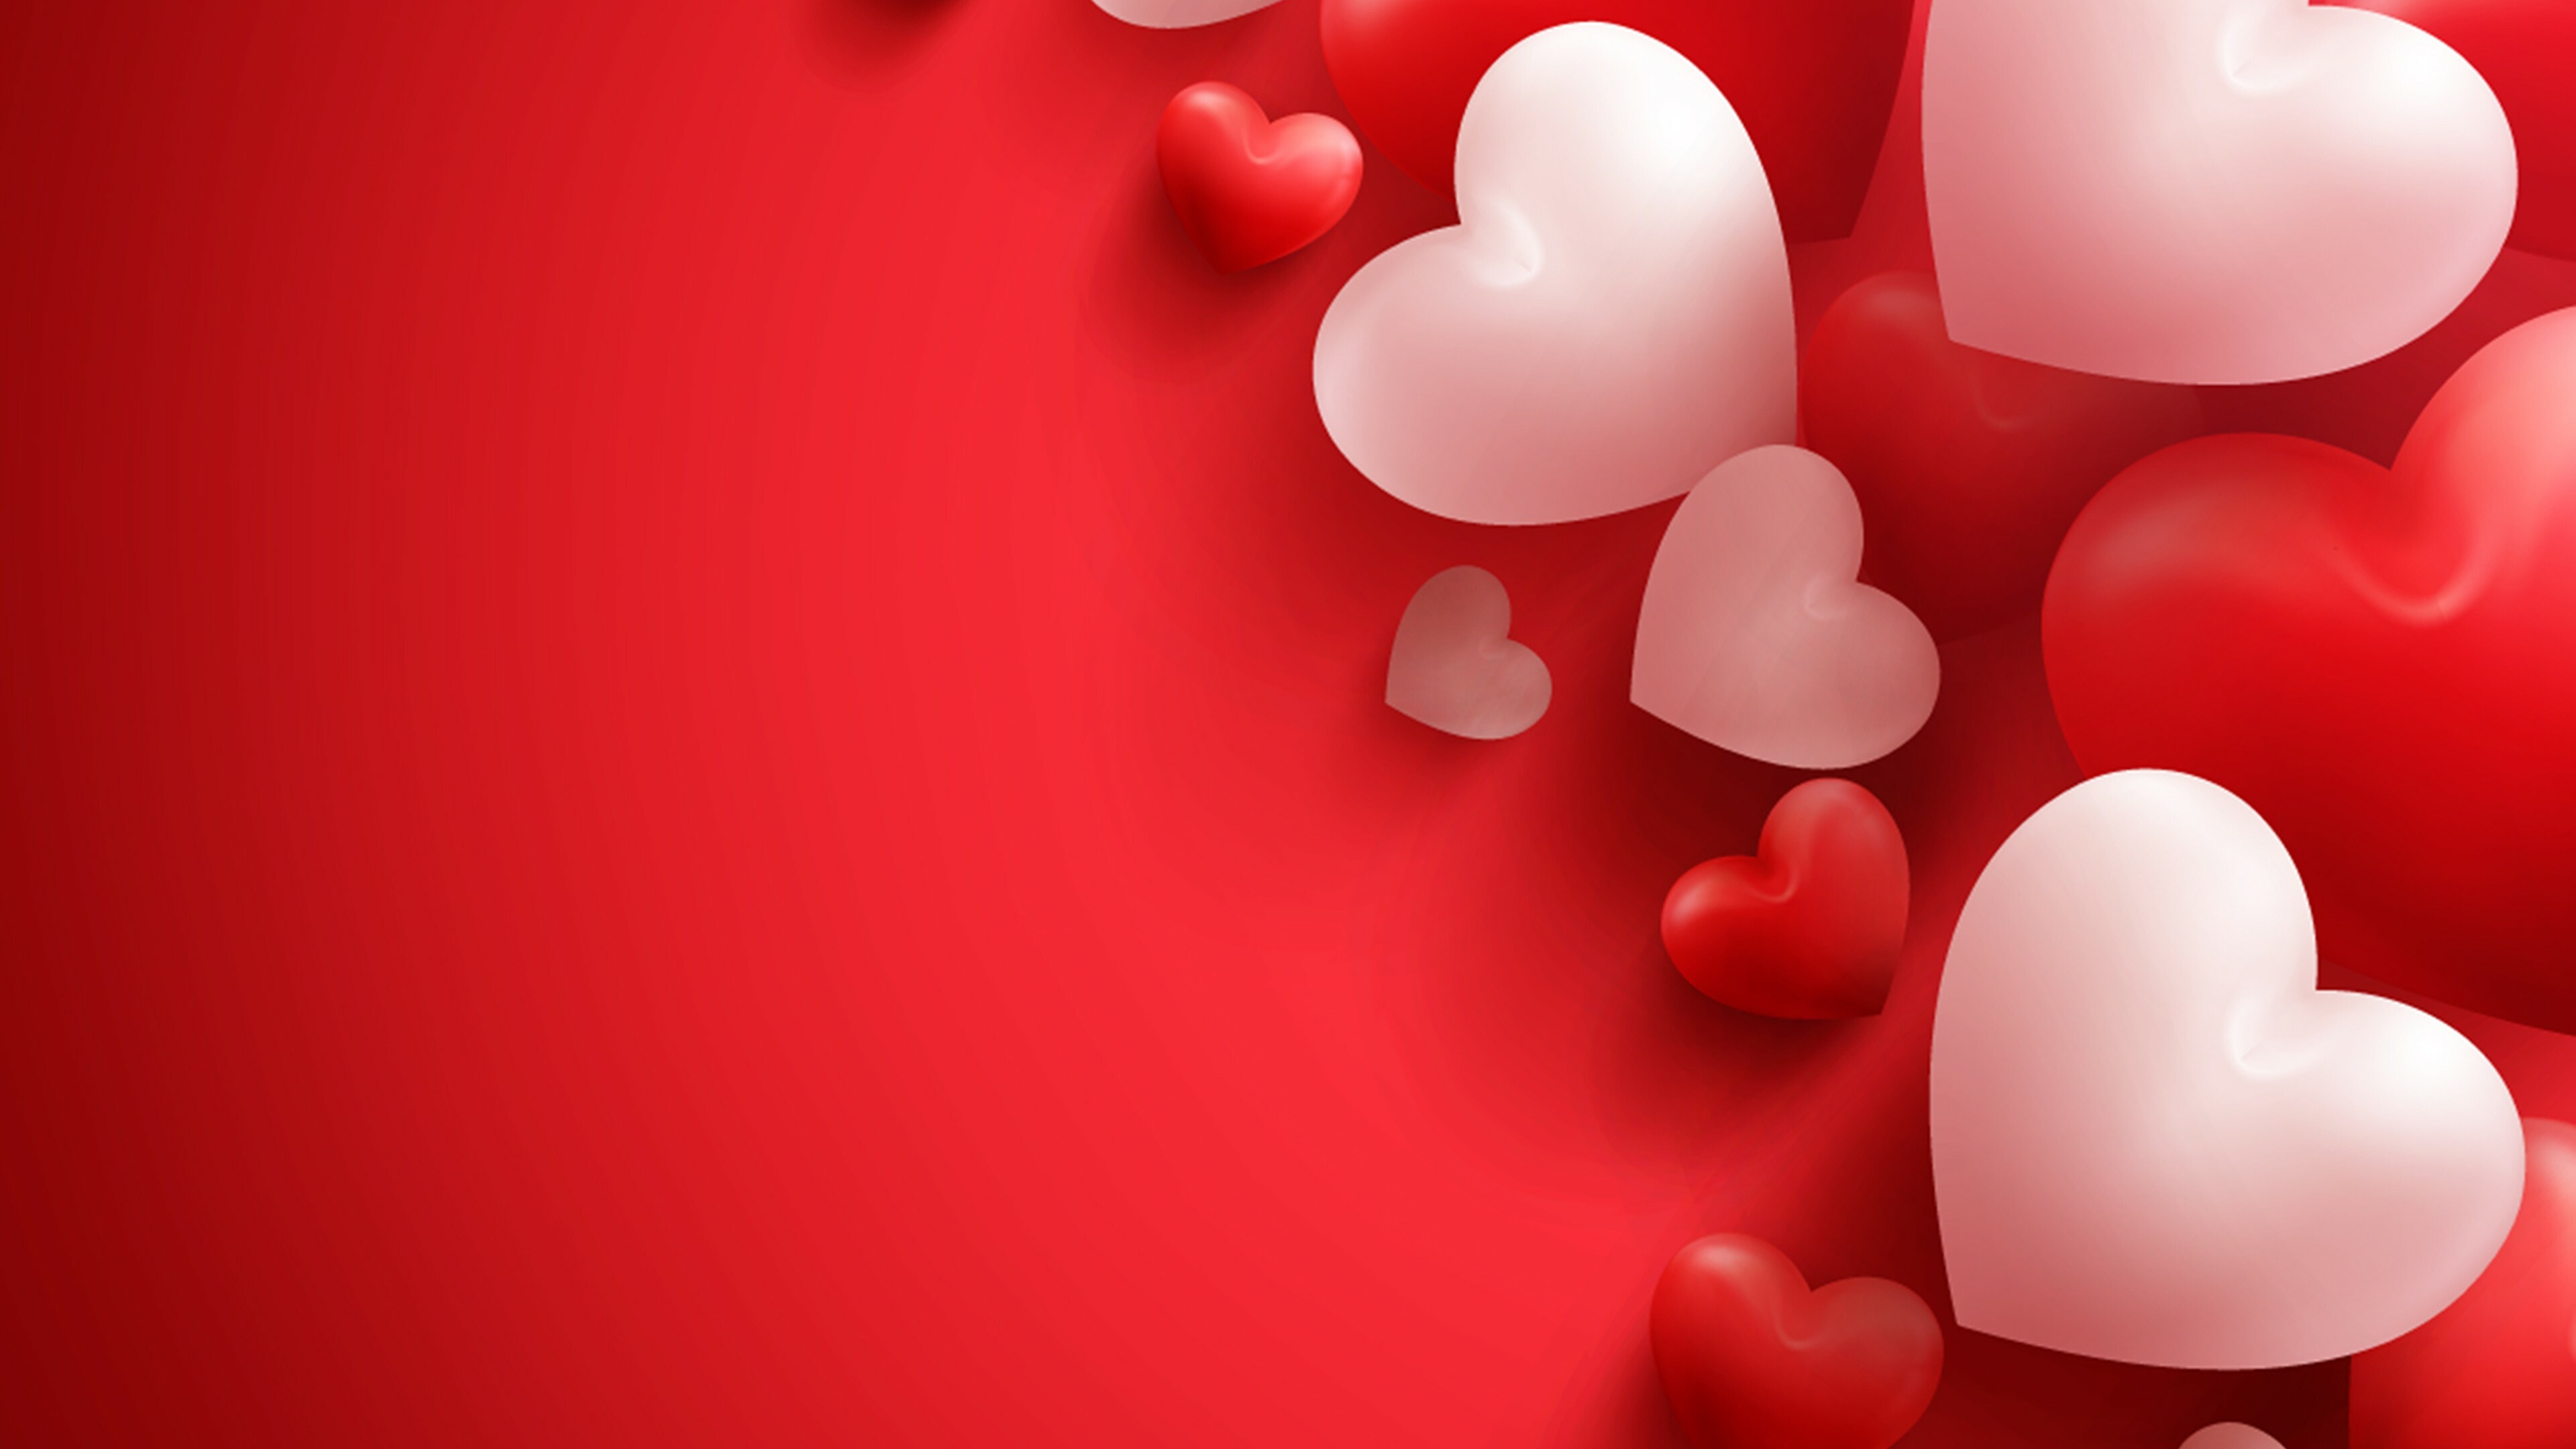 4K Valentine's Day, Stunning wallpapers, Romantic vibes, High-resolution images, 3840x2160 4K Desktop